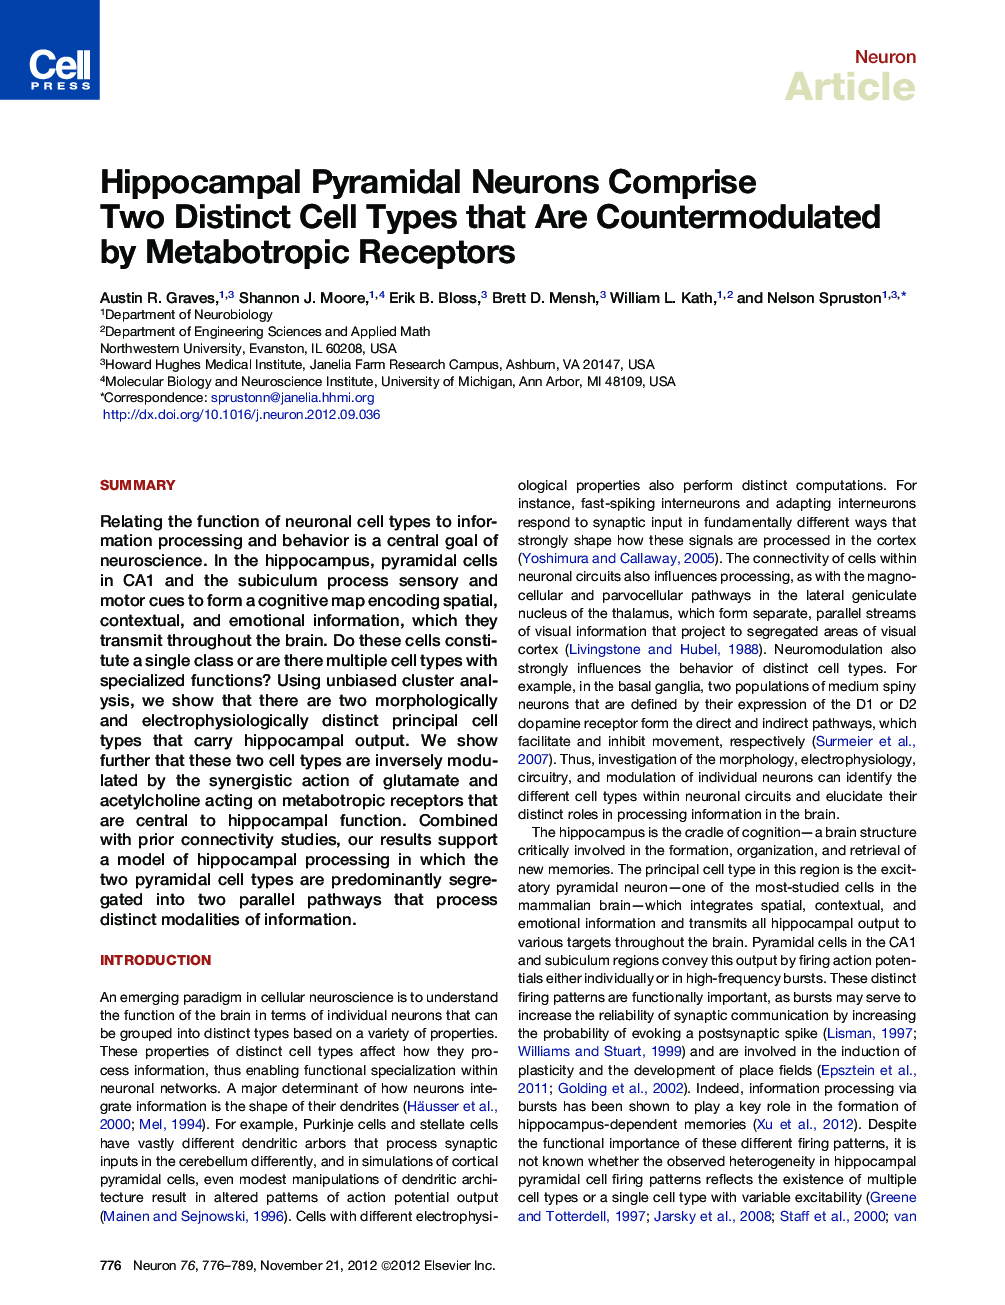 Hippocampal Pyramidal Neurons Comprise Two Distinct Cell Types that Are Countermodulated by Metabotropic Receptors